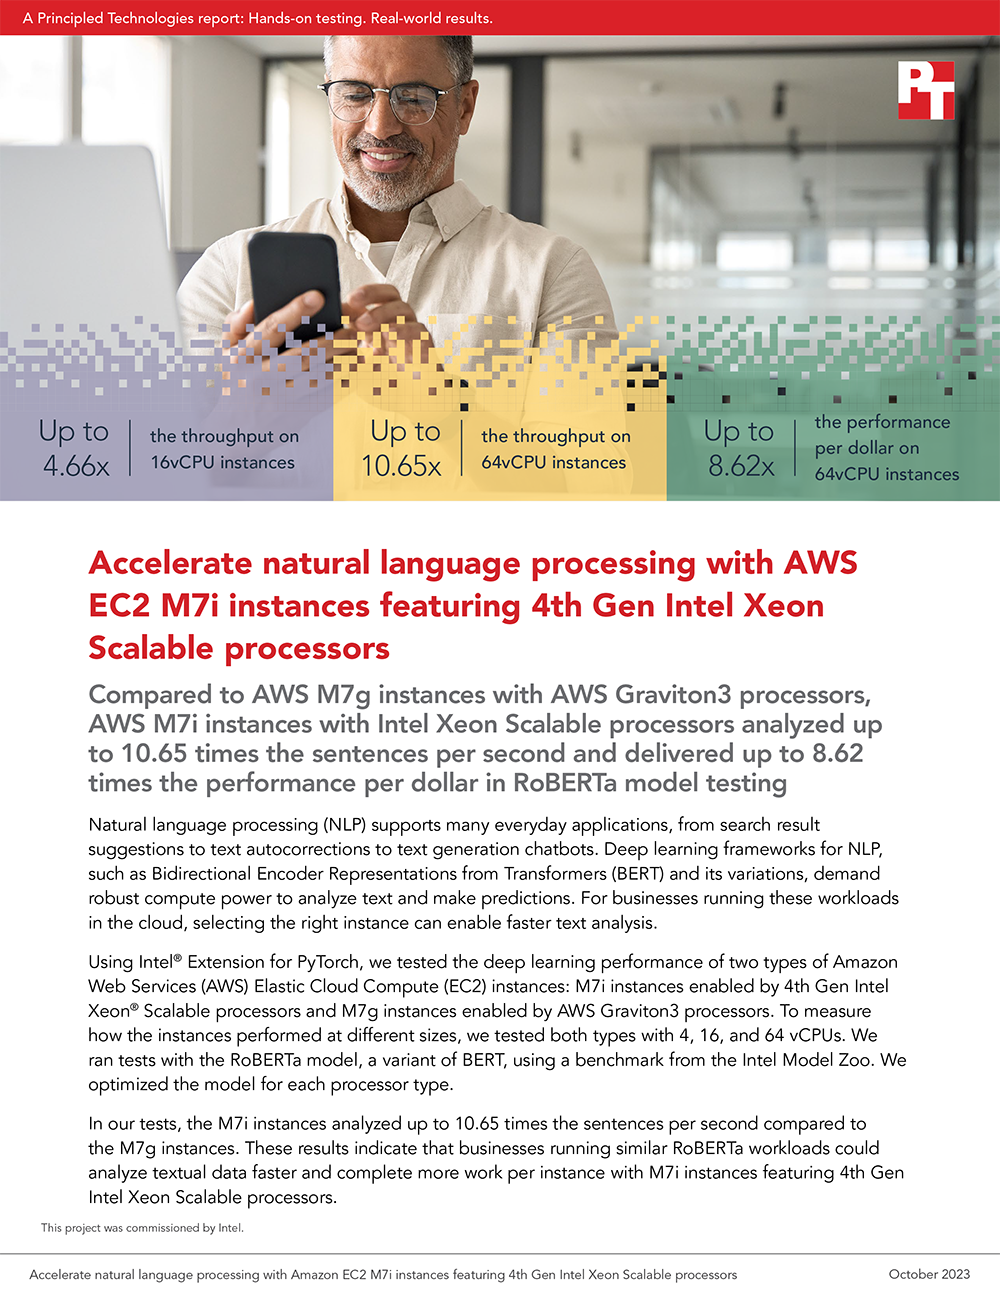  Accelerate natural language processing with AWS EC2 M7i instances featuring 4th Gen Intel Xeon Scalable processors